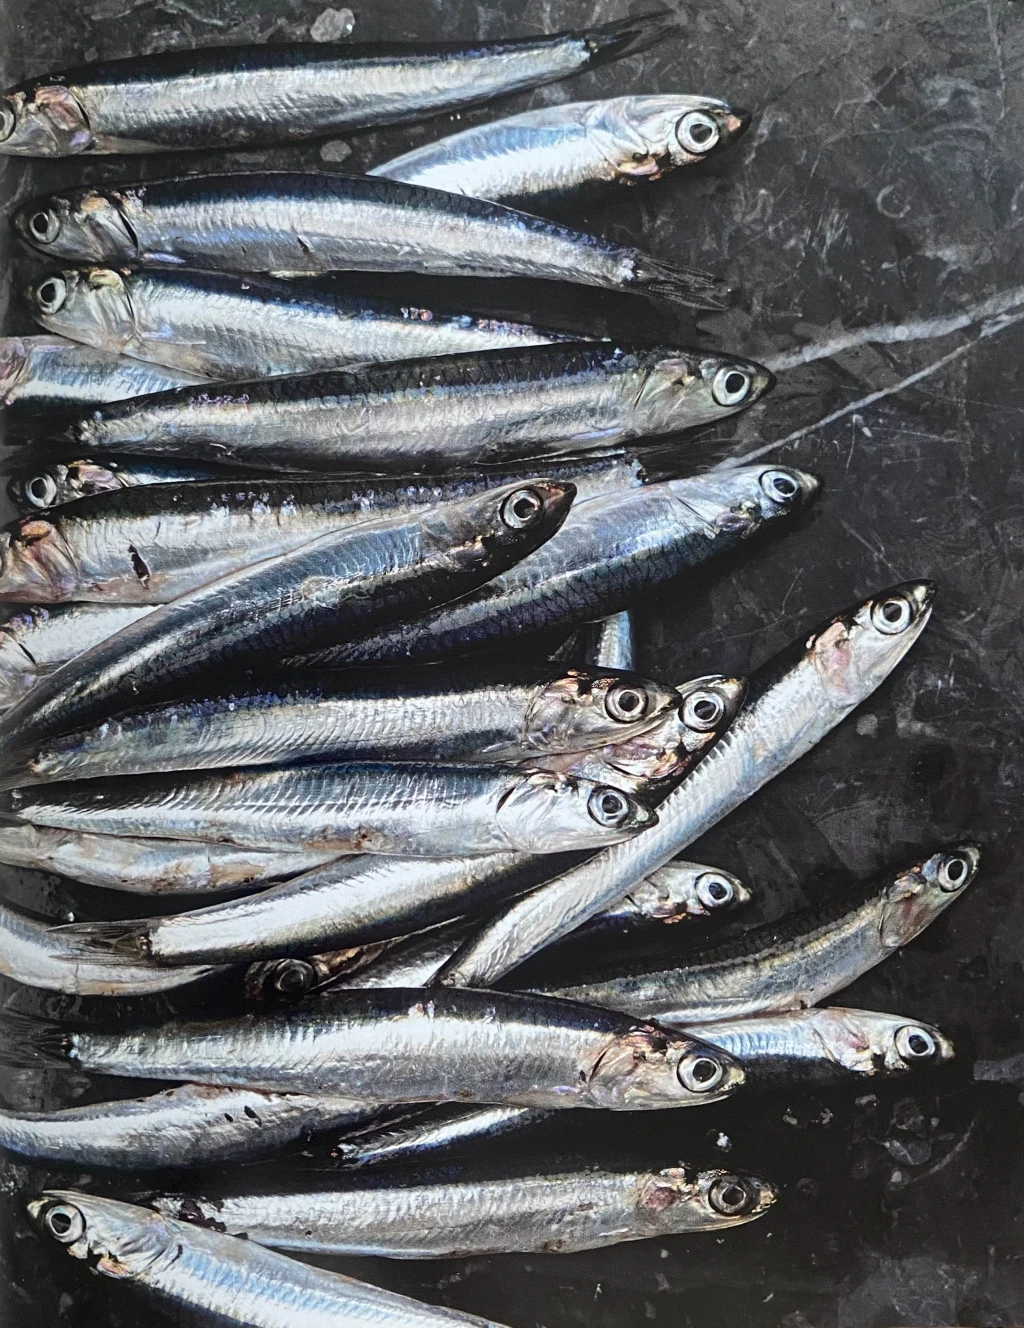 The Ligurian Anchovies are legendary